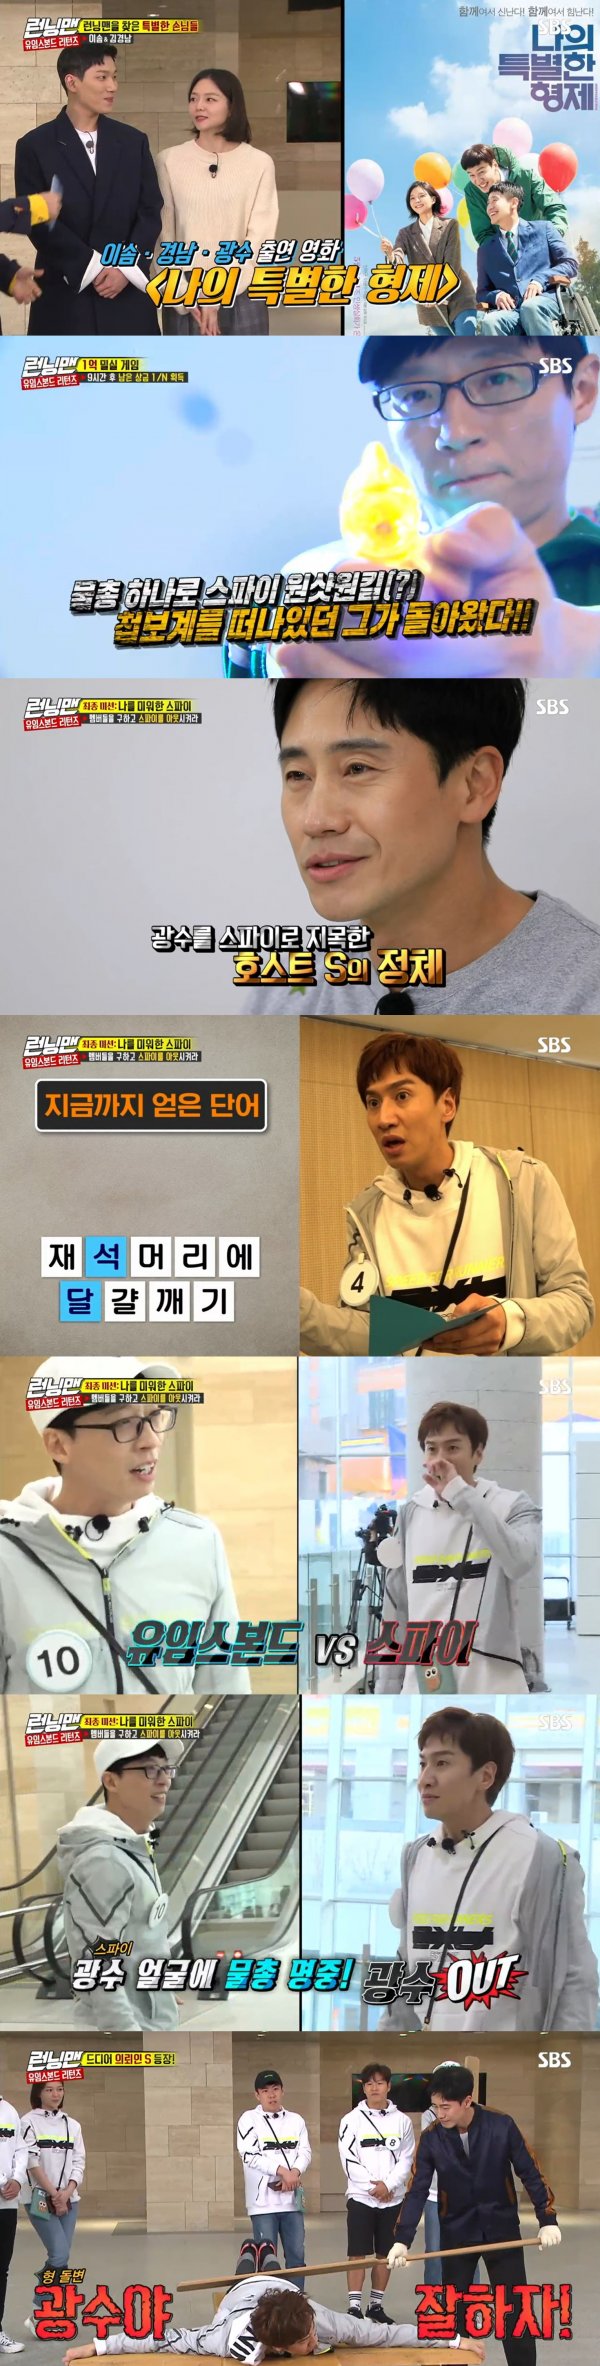 SBS Running Man officially apologized for the controversy over plagiarism of Navers popular webtoon Money Game.On the SBS entertainment program Running Man, which aired on the 28th, it was packed with the Returned Uims Bond - 100 million One man, and the Game was held where the members held 9 hours in their containers and had one-ninth of the remaining prize money.After the broadcast, some netizens raised suspicions that the way the Game was played was similar to the webtoon Money Game.The production team is also a fan of Money Game and the concept of Webtoon is well suited to Running Man, so we borrowed and transformed the contents of Money Game to play the Game, Running Man admitted to Dong-A.com on the 29th.However, I am sorry that I could not ask for your understanding of Naver Webtoon, which is serving Money Game Bae Jin-soo and Webtoon in advance.I apologize for the lack of production team, he said. The production team will contact both sides to convey their apology. However, additional issues such as legal action are still needed.Were talking to each other so that it can be resolved smoothly, he said.However, Naver Webtoon is expected to respond. Naver Webtoon officials told Dong-A.com that they are considering countermeasures to protect the rights of creators.